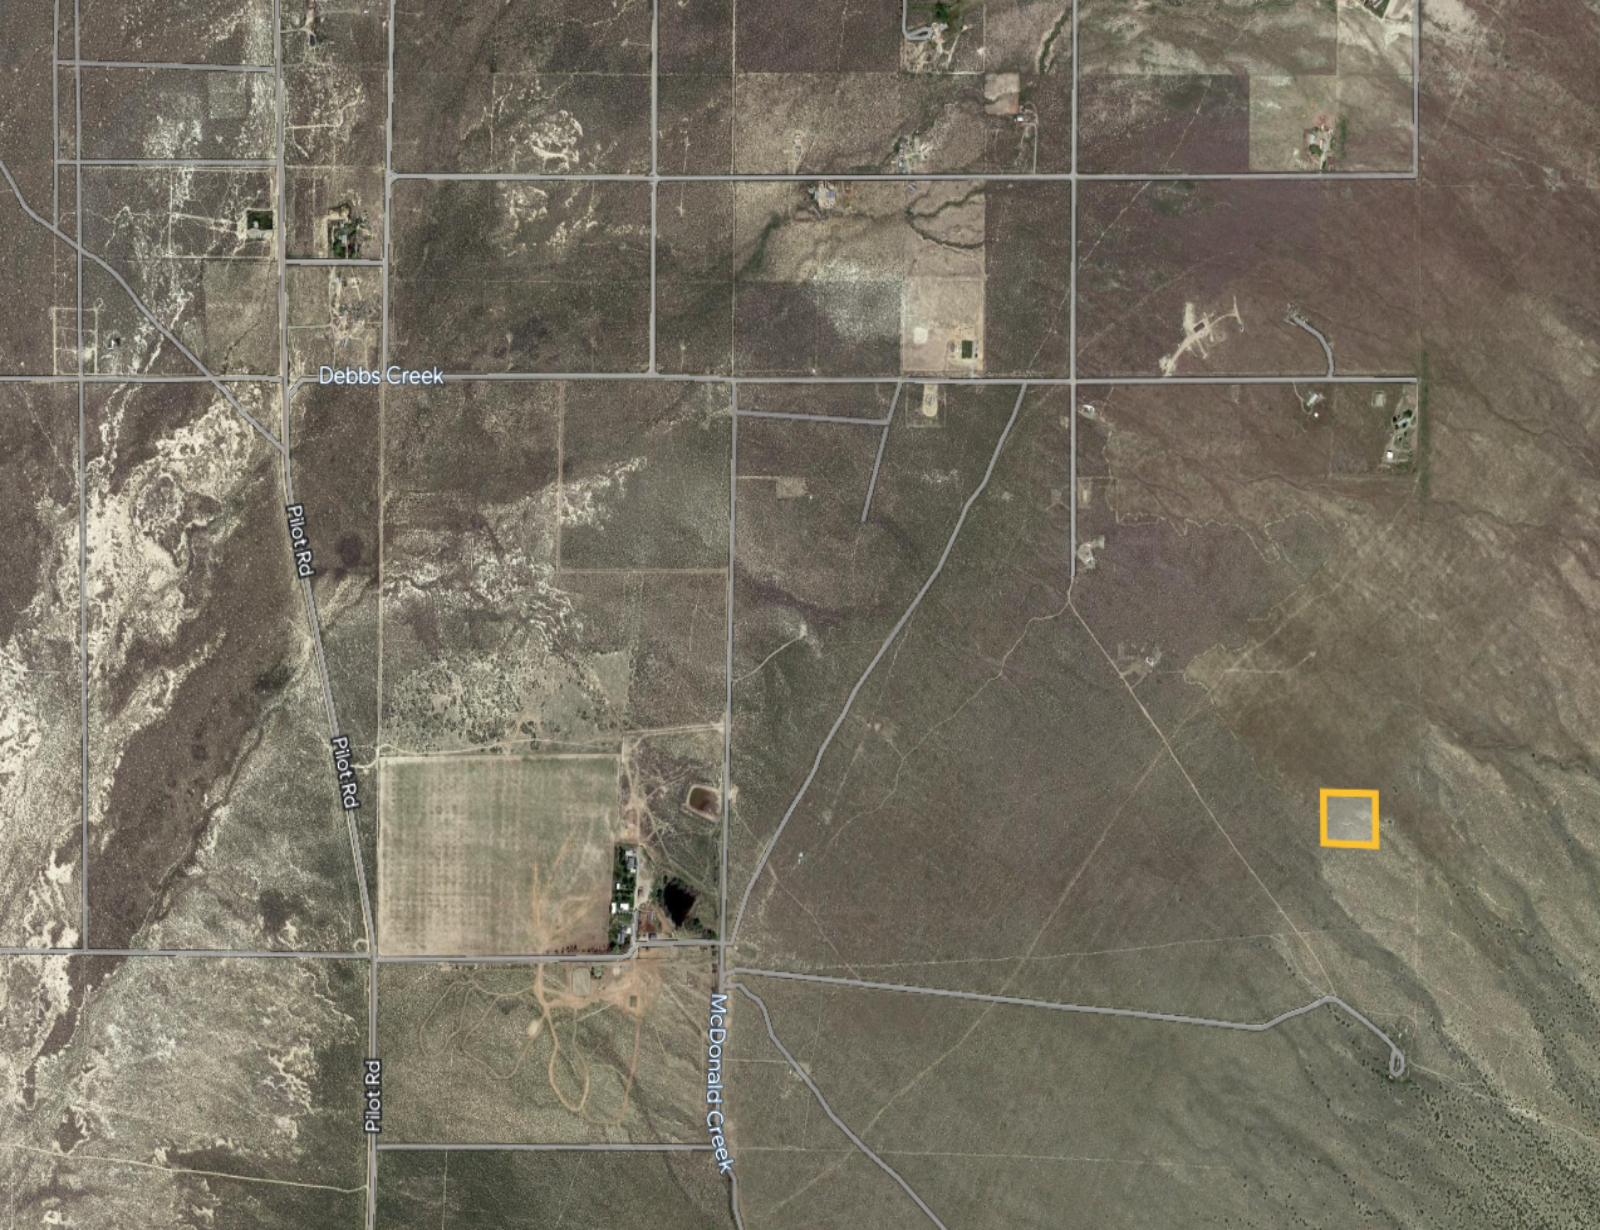 *NEW* ELKO COUNTY RESIDENTIAL LOT NEAR COBRE NEVADA!! LOW MONTHLY PAYMENTS OF $175.00  13th St., Elko, NV 89801  APN: 011-104-027 - Get Land Today